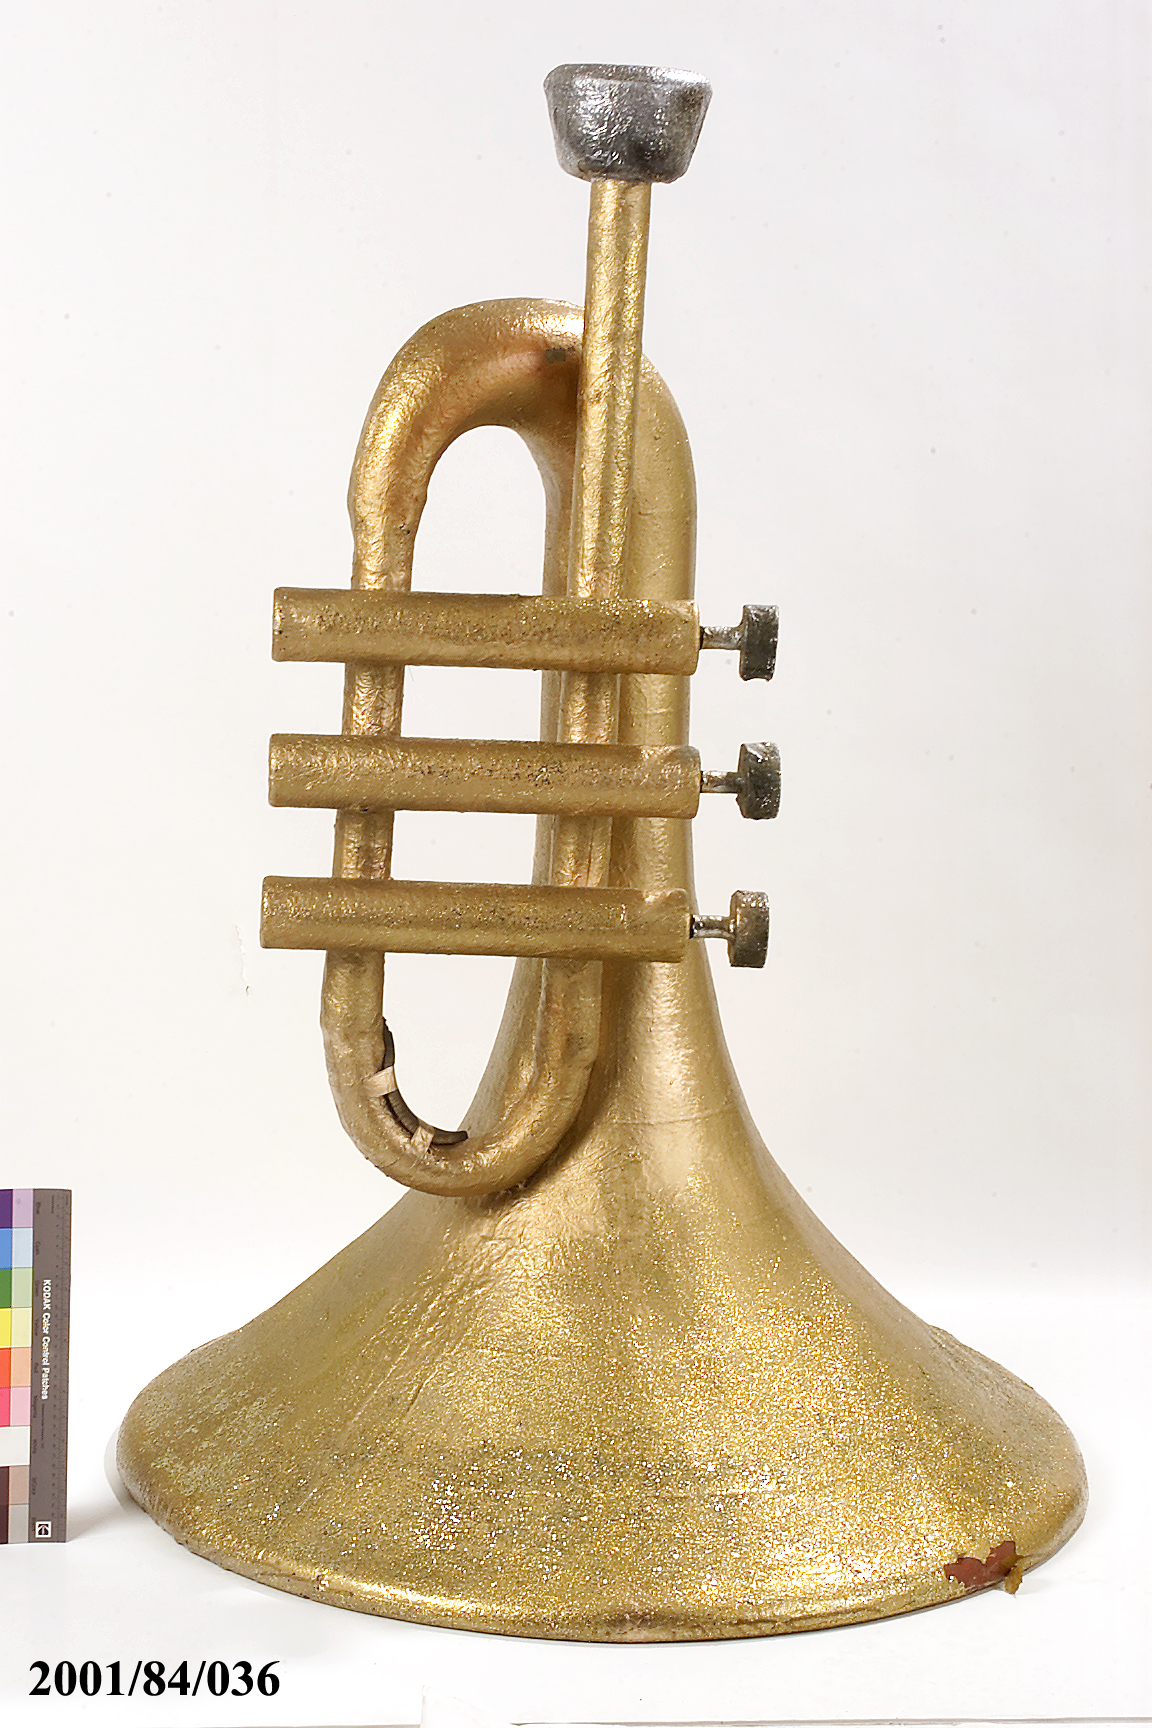 Trumpet performance prop used in the Sydney Olympic Games Opening Ceremony